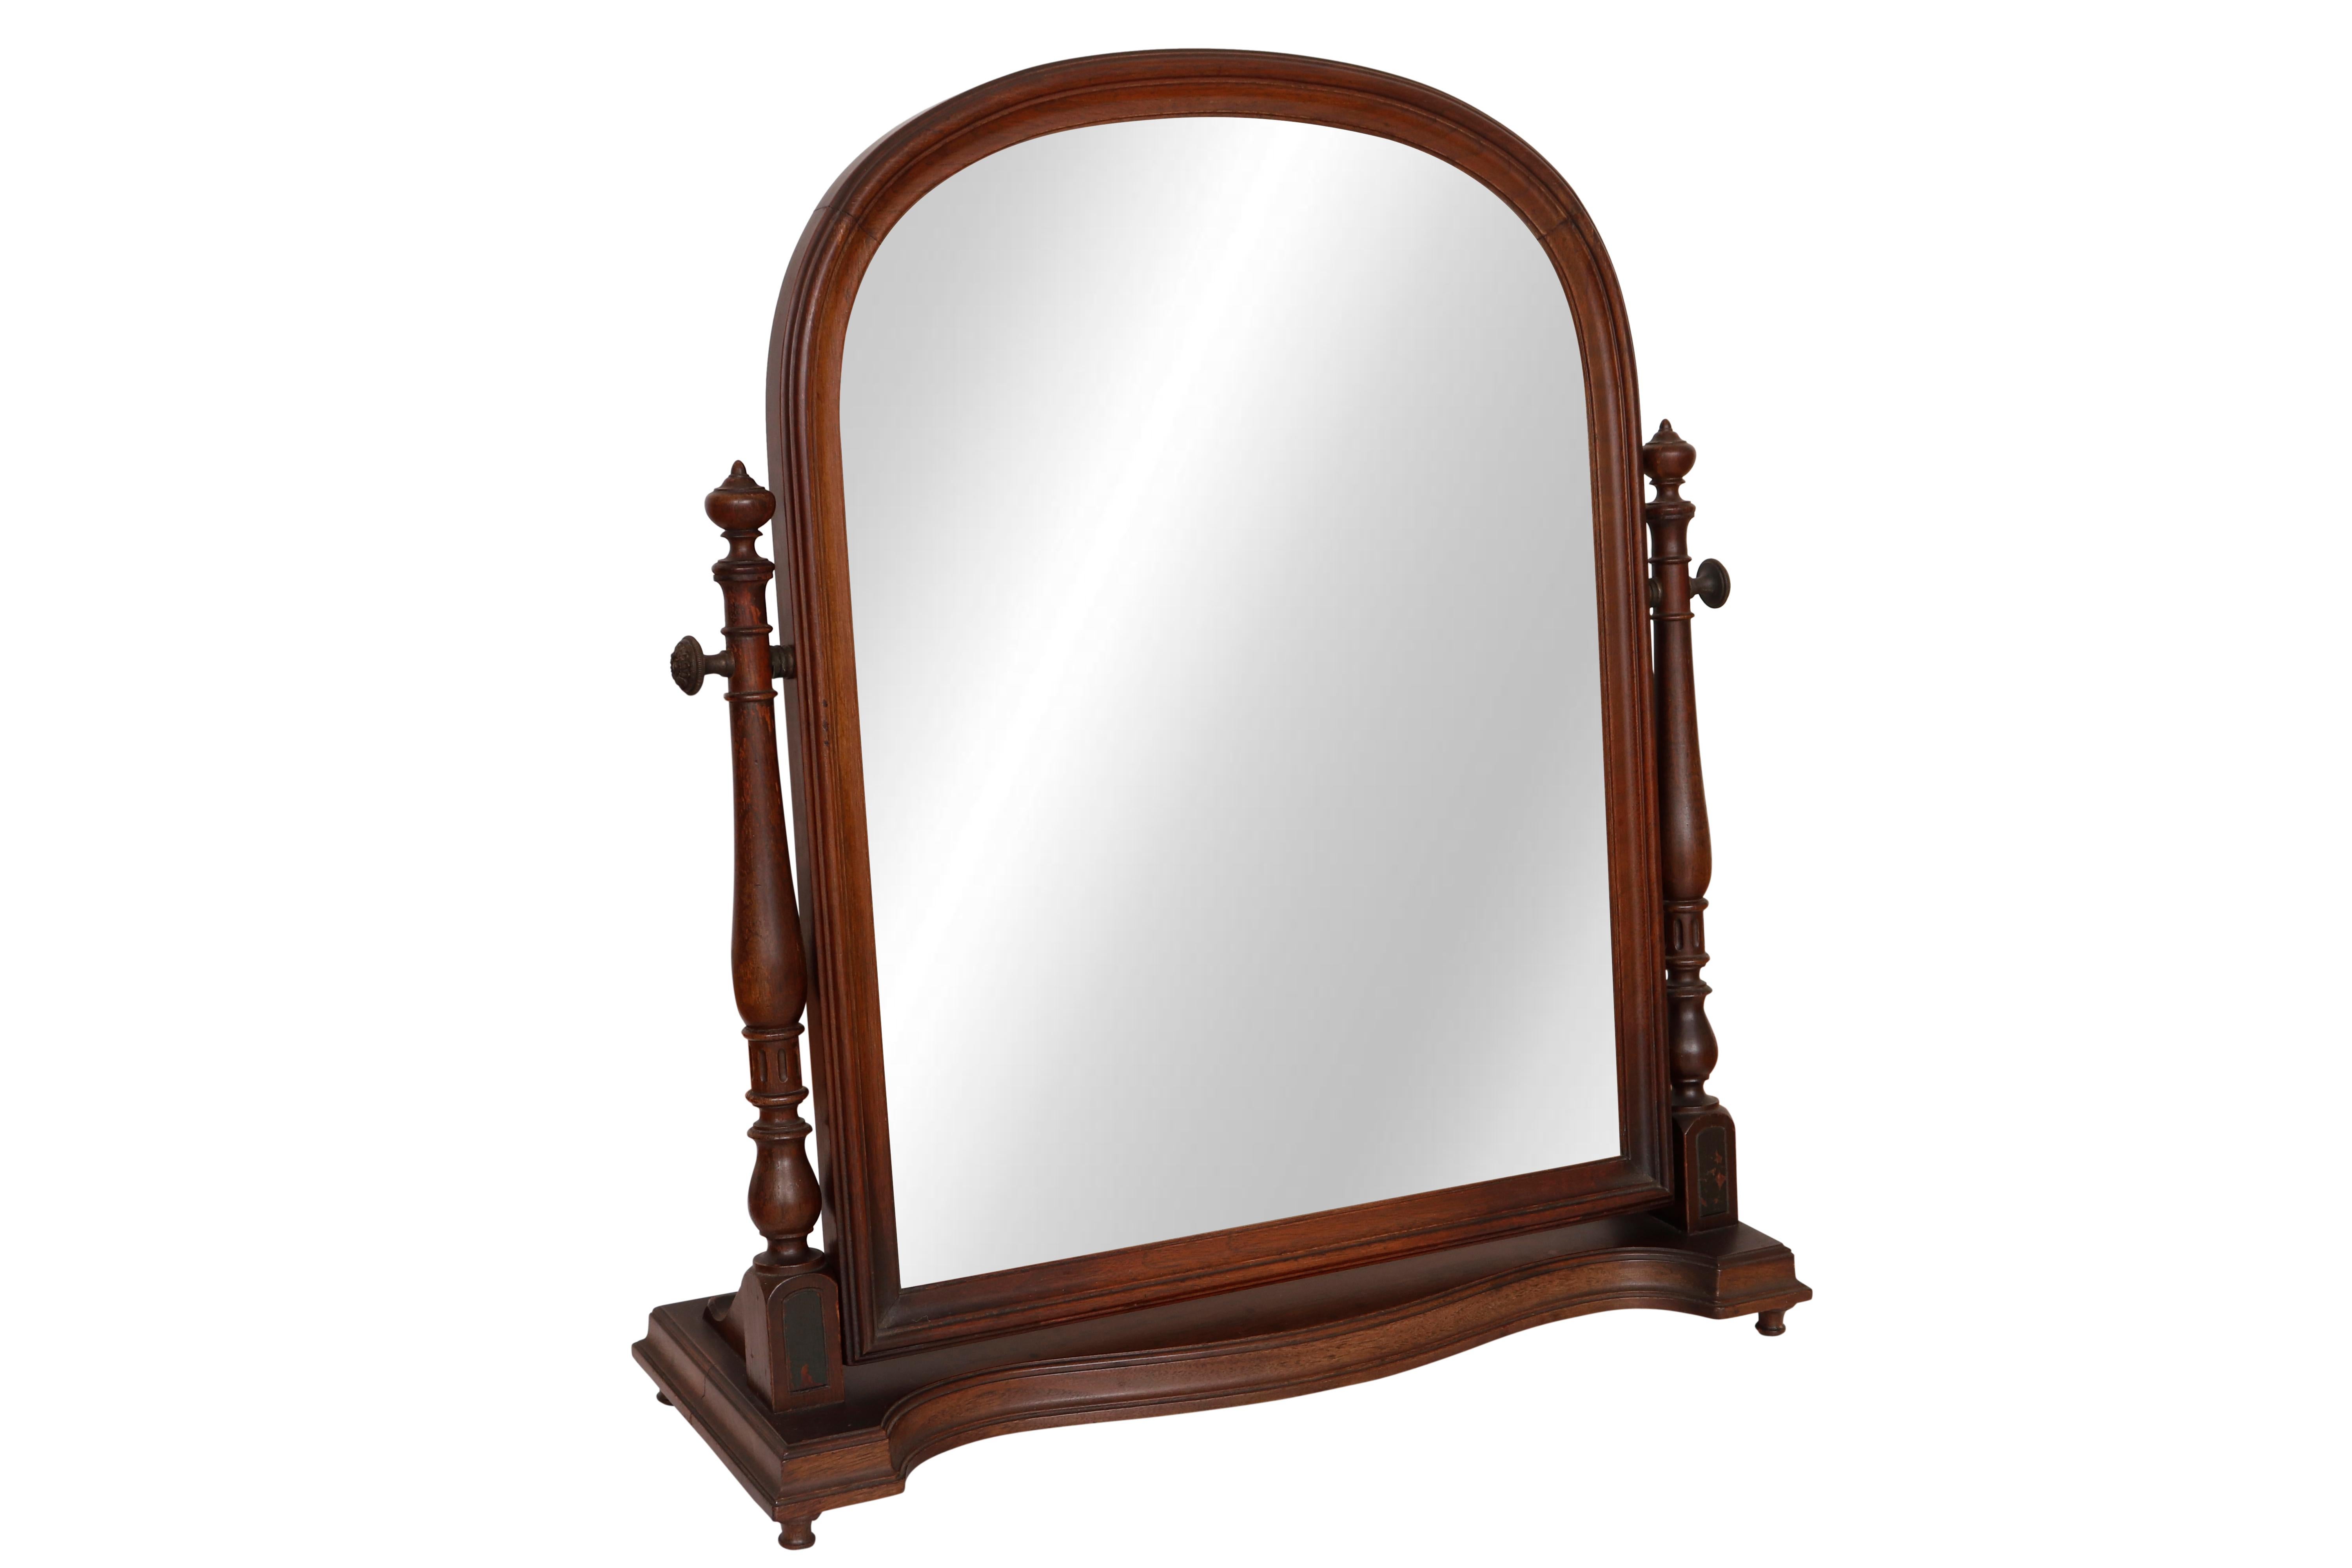 A neoclassical vanity mirror. An arched mirror set in a beveled wooden frame is supported with two turned posts. Each post is topped with an acorn finial and secured to the base with a curved bracket. The base is decorated with a serpentine curved